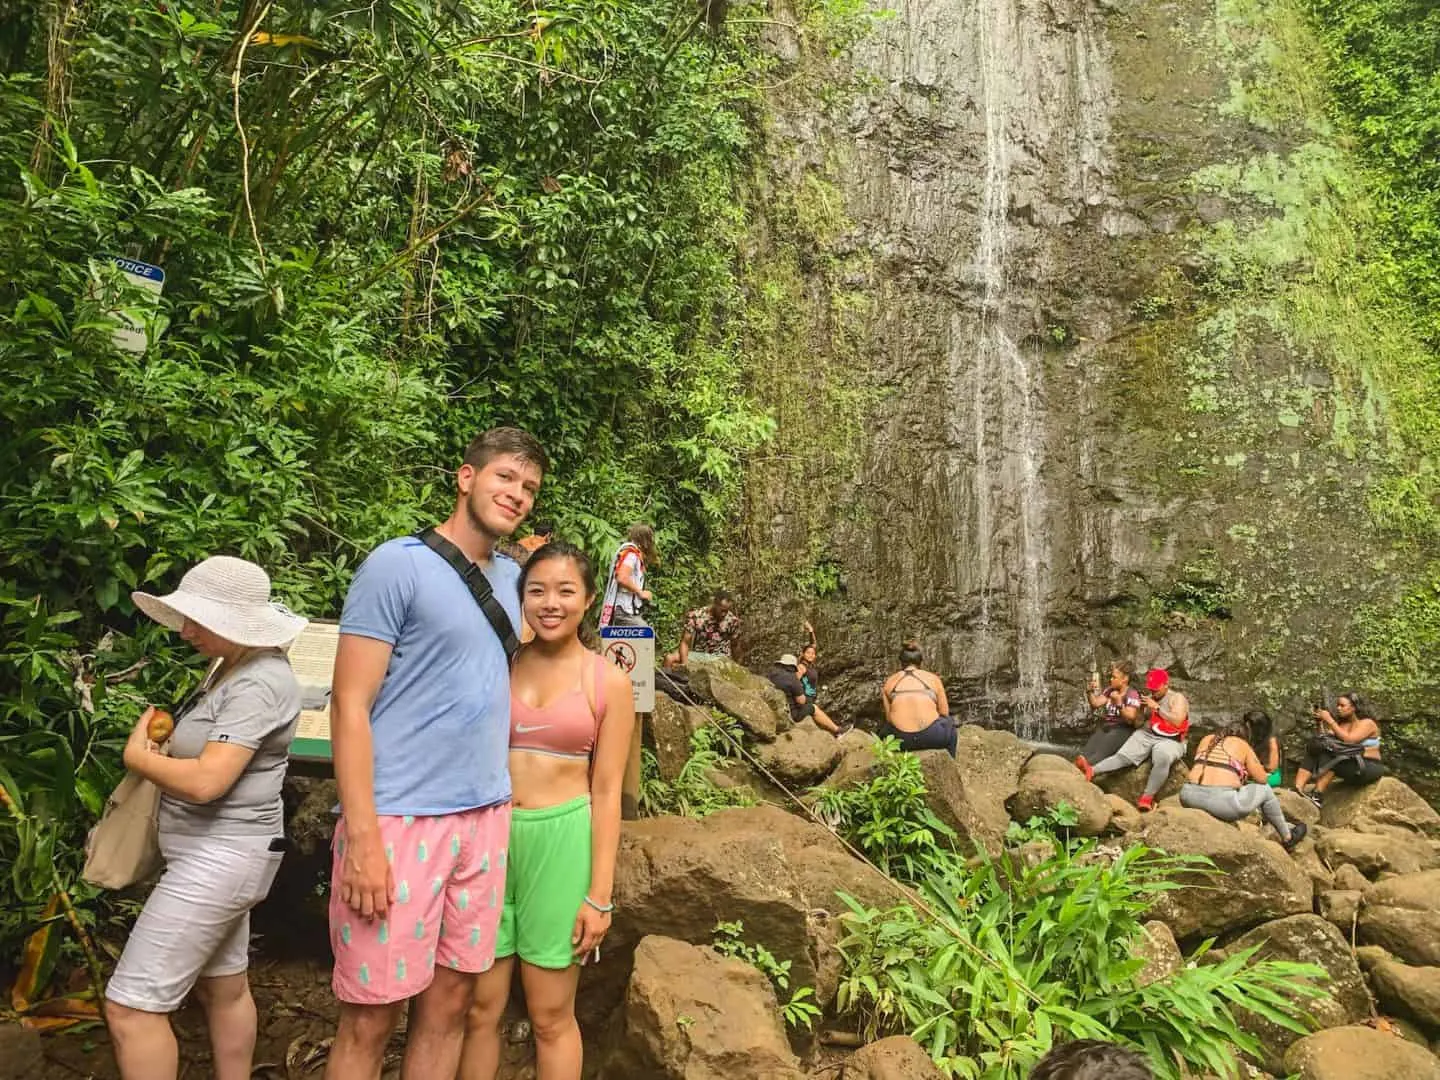 The Mauniwili Falls hike is one of the best hikes to add to your Oahu itinerary